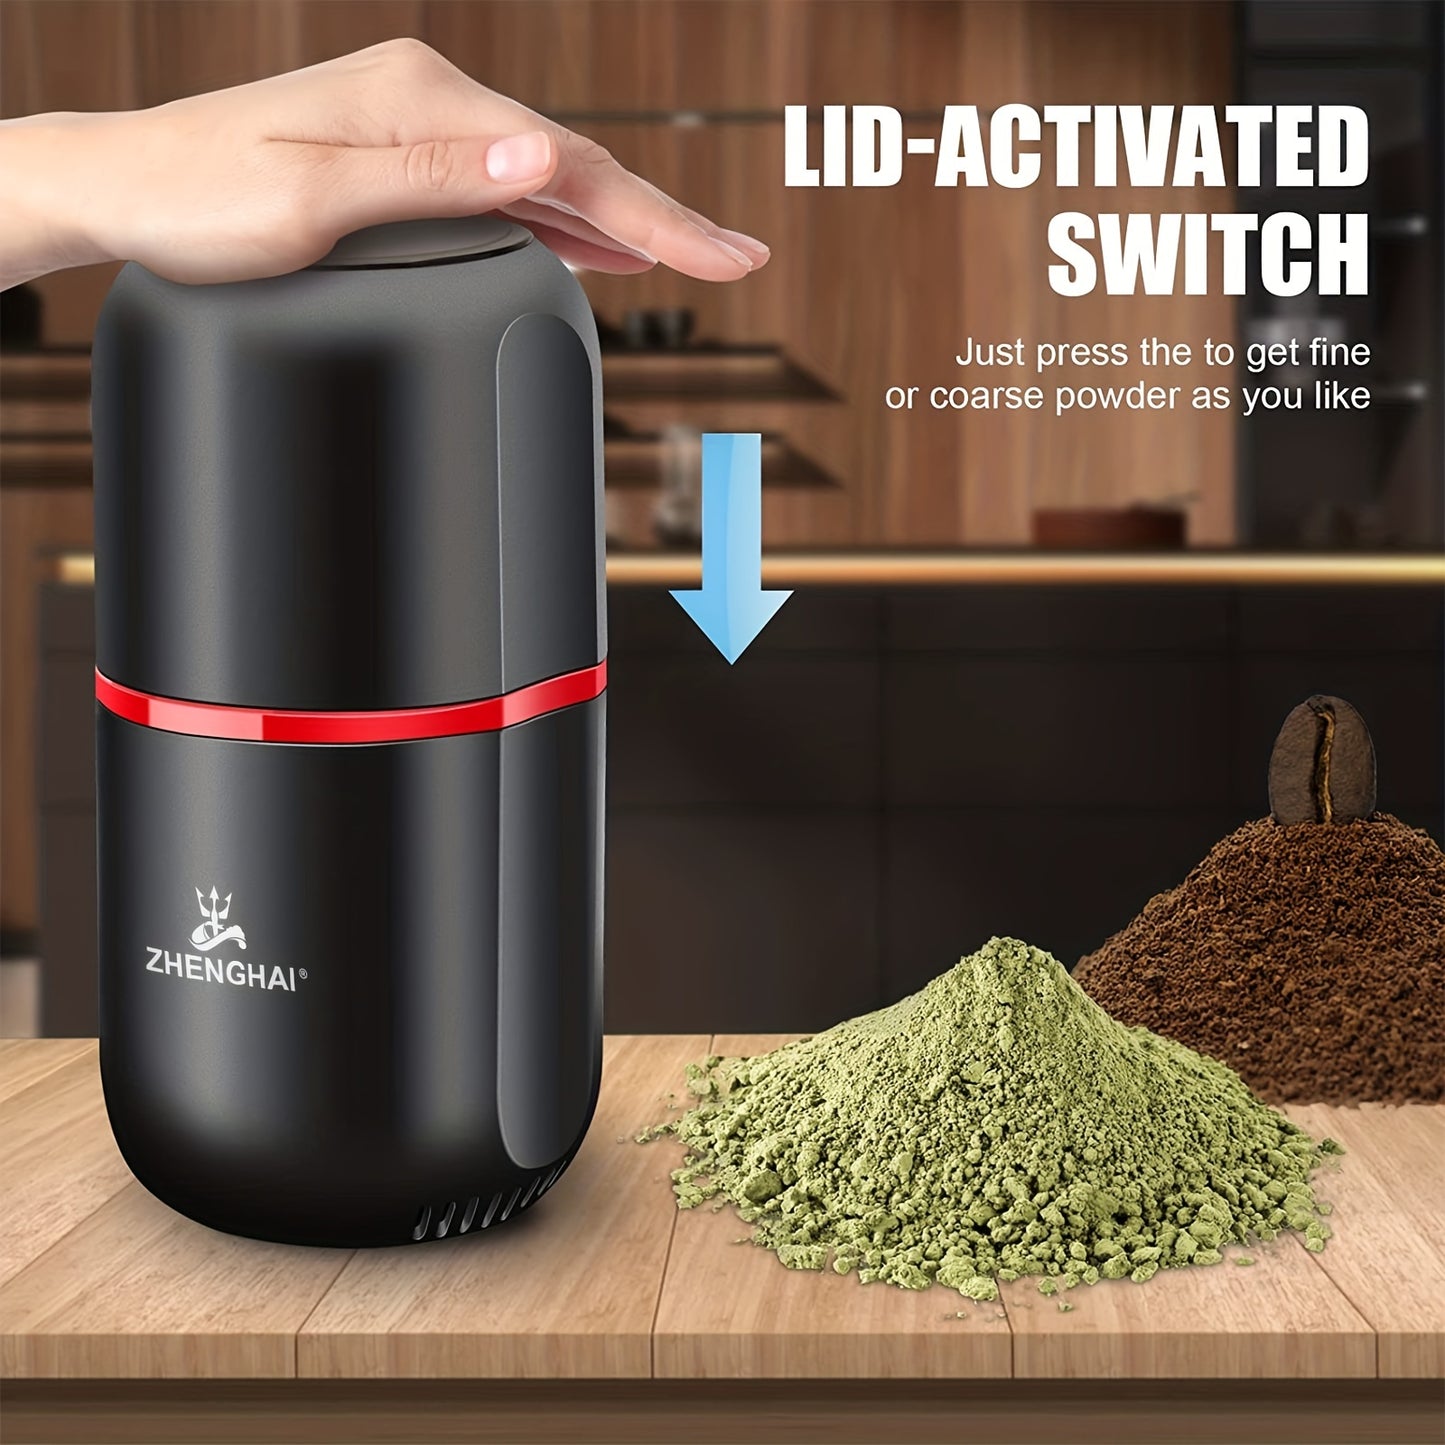 ZHENGHAI 4.23oz Large Capacity Electric Spice Grinder - Fast Grinding For Coffee Bean, Nuts, Dry Spices, Flower Buds - Includes Cleaning Brush